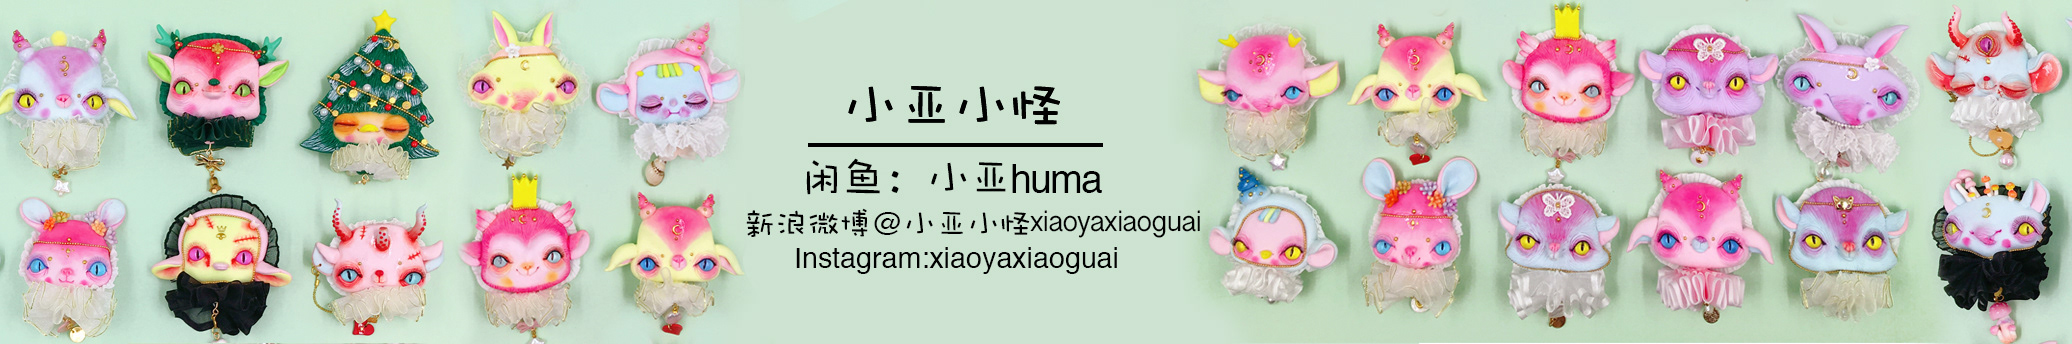 XX Monster 小亚小怪's profile banner